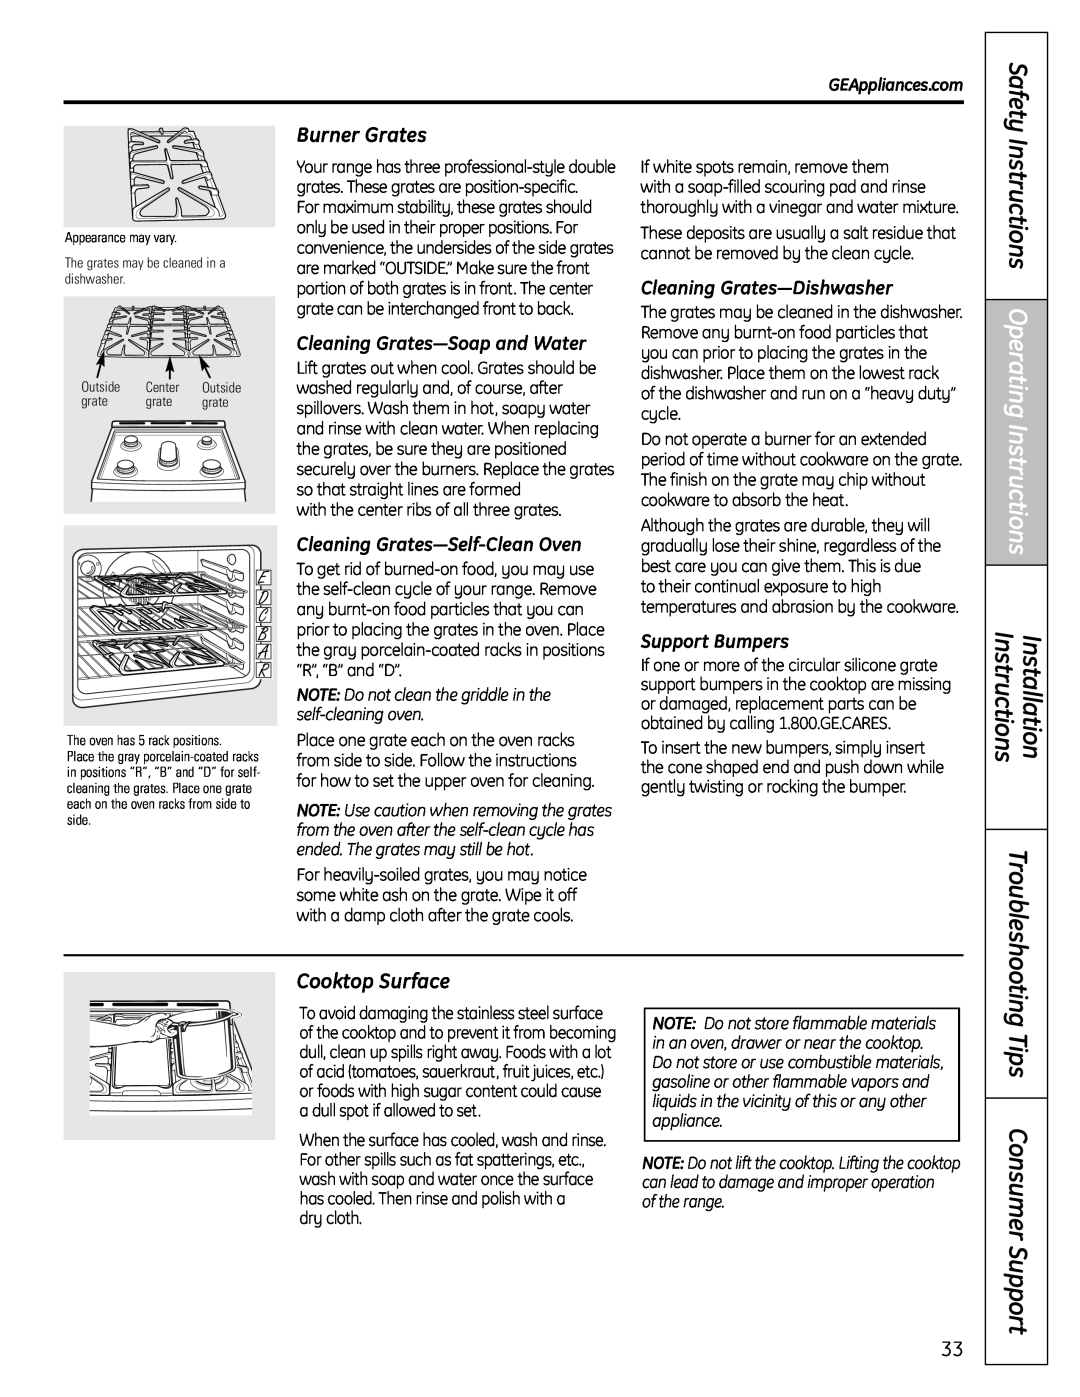 GE 04-09 JR manual Tips Consumer Support, Burner Grates, Cooktop Surface, Instructions Operating Instructions, Installation 